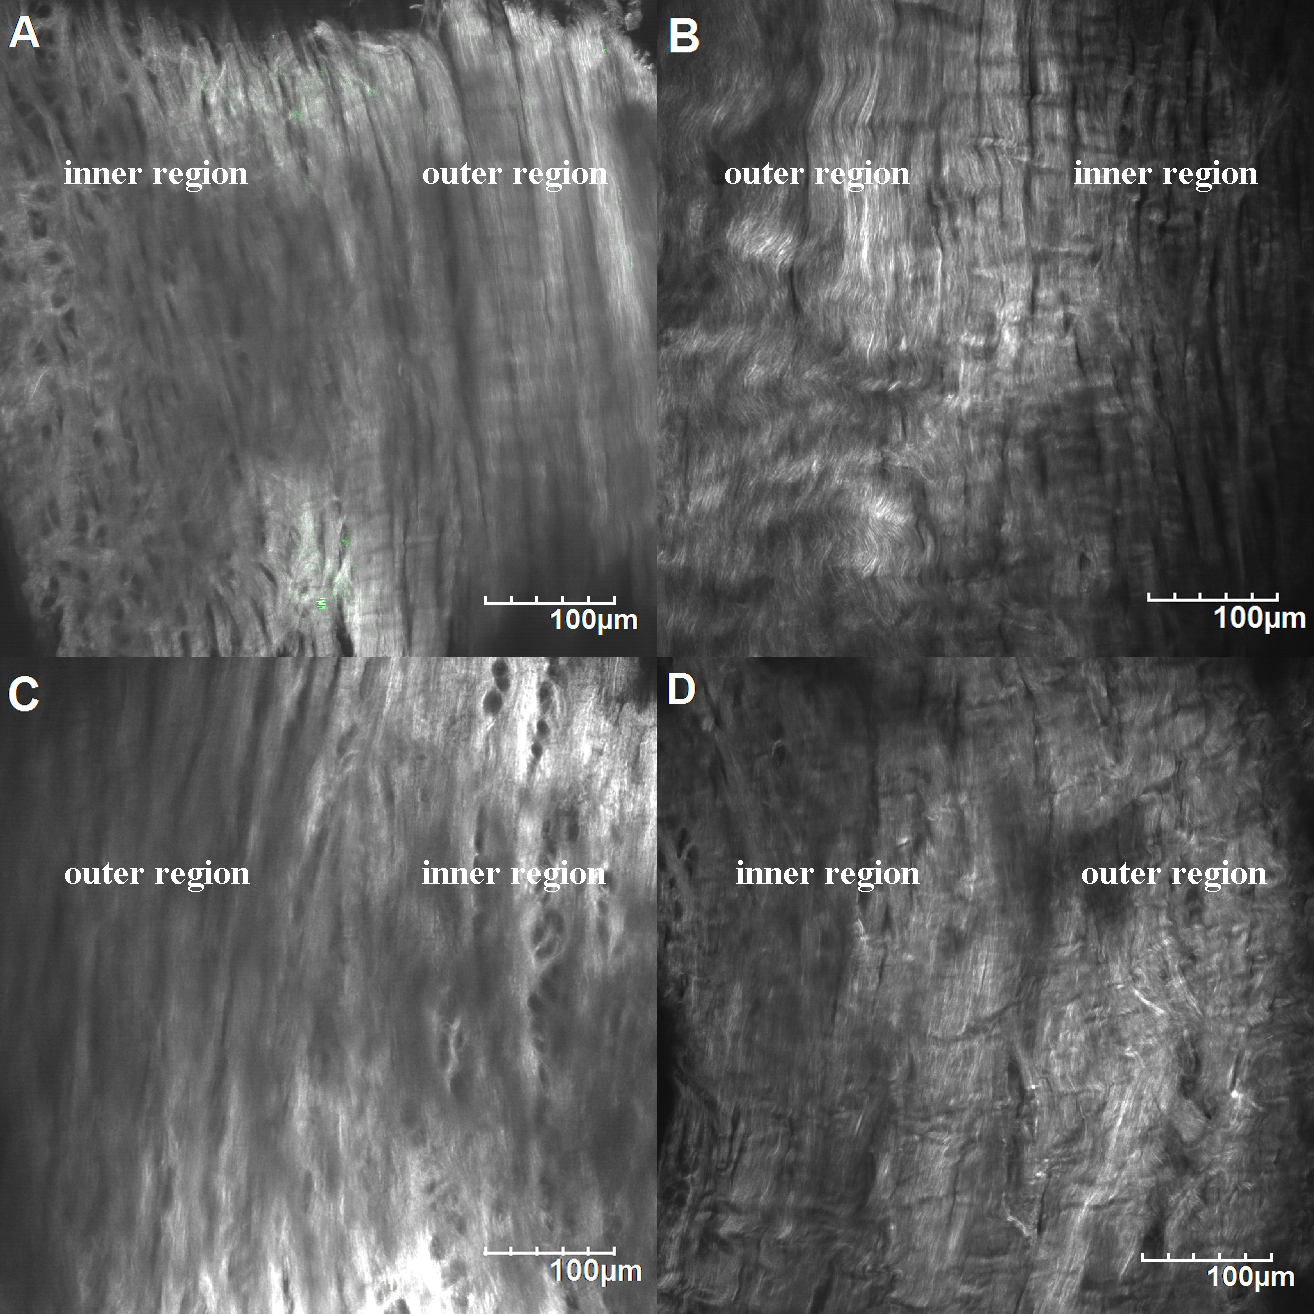 Collagen microstructure of the menisci. A) Medial meniscus of the control group. B) Medial meniscus of the experimental group. C) Lateral meniscus of the control group. D) Lateral meniscus of the experimental group.